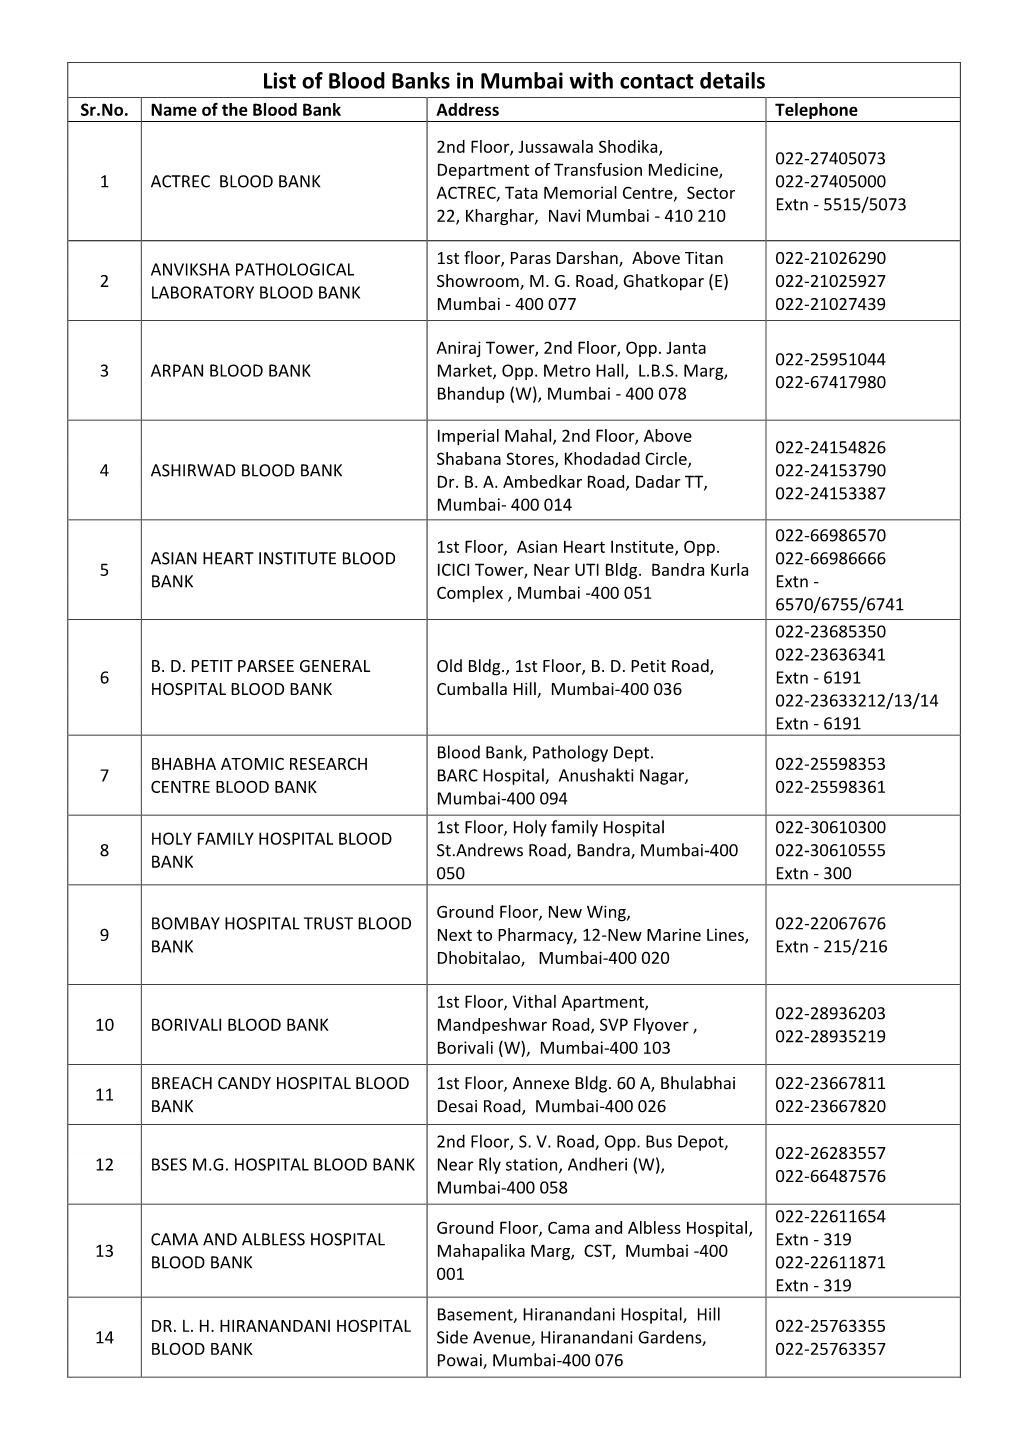 List of Blood Banks in Mumbai with Contact Details Sr.No